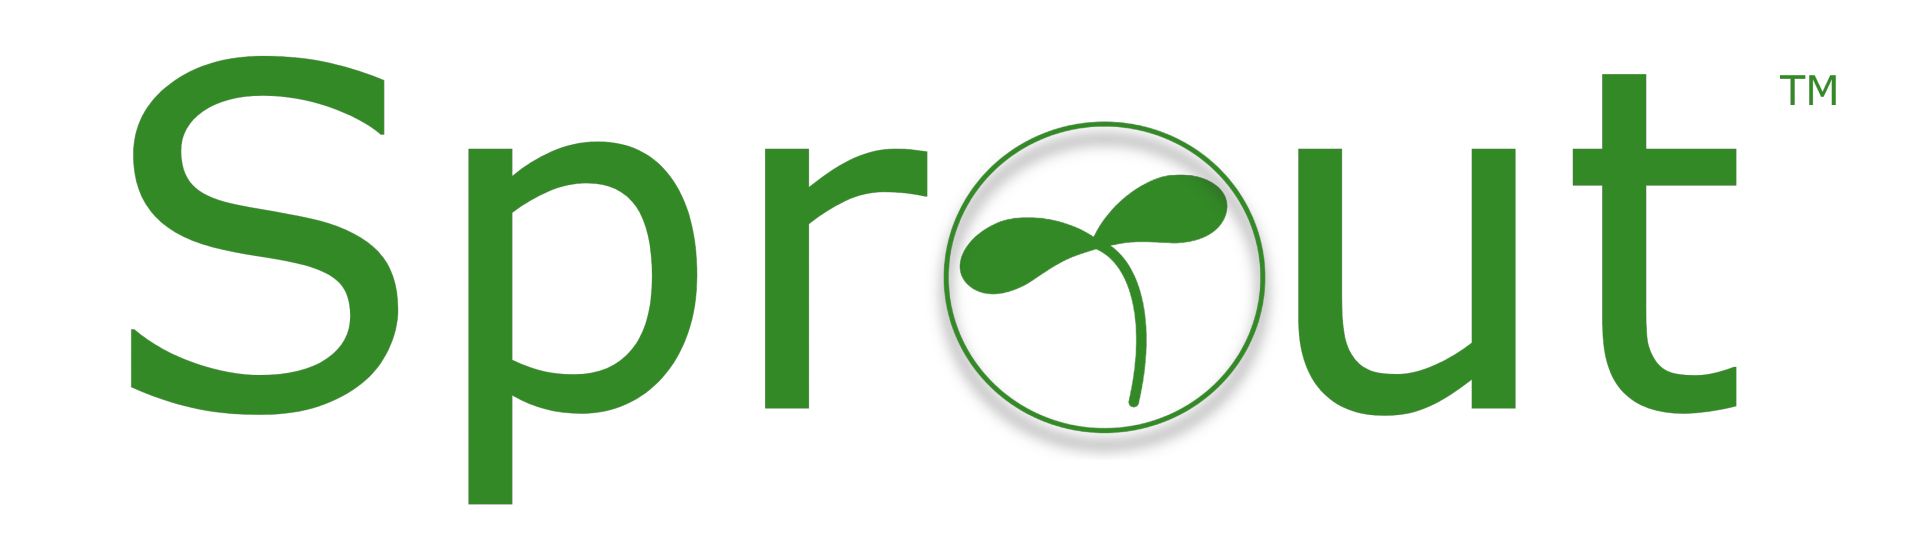 Sprout Logo